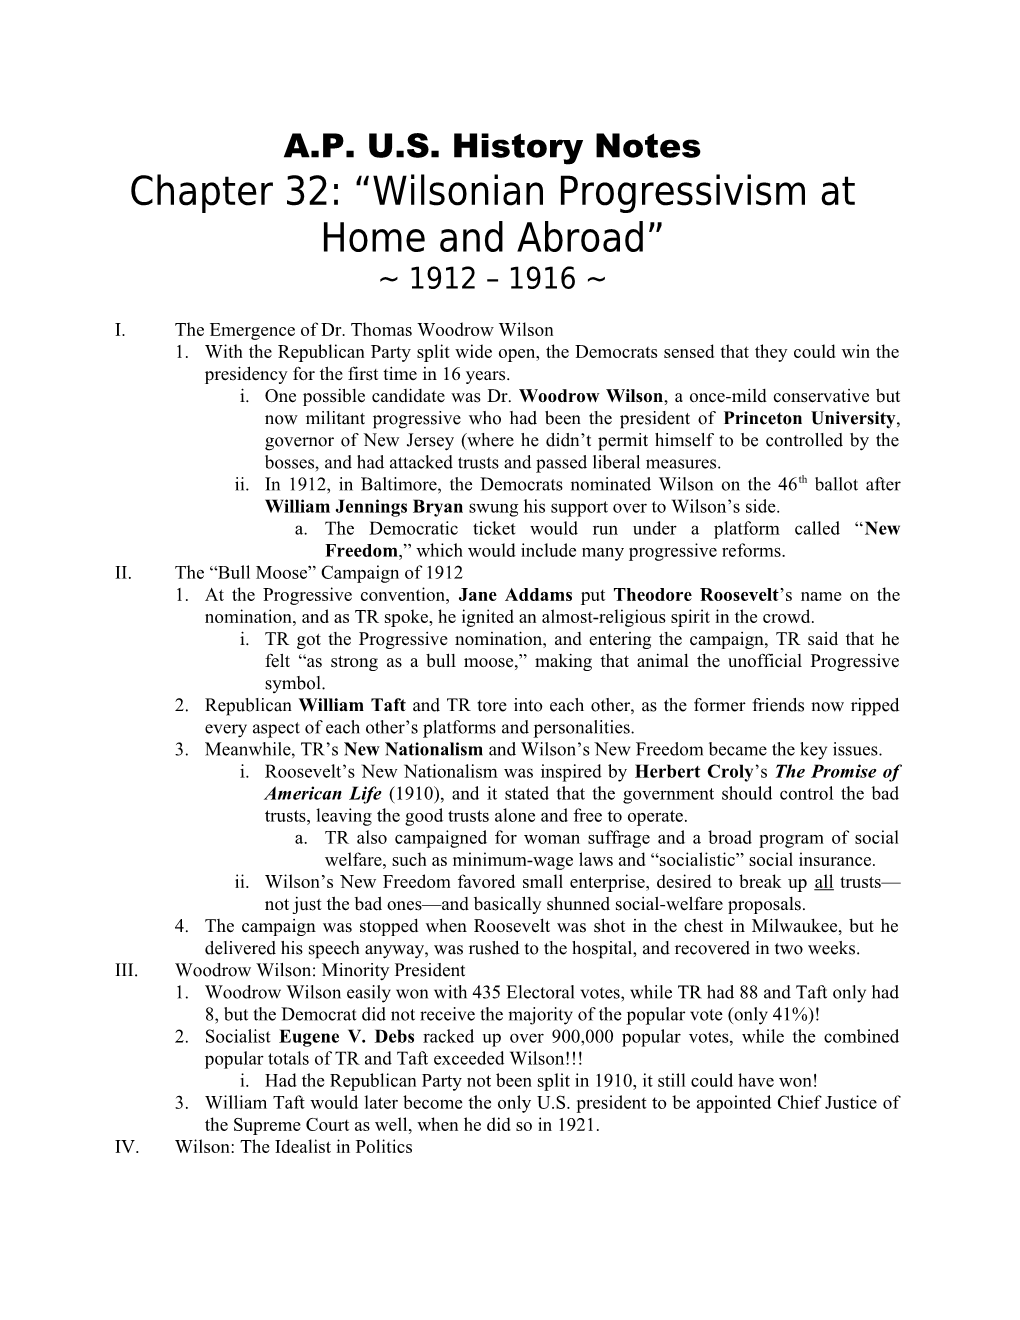 Chapter 32: Wilsonian Progressivism at Home and Abroad